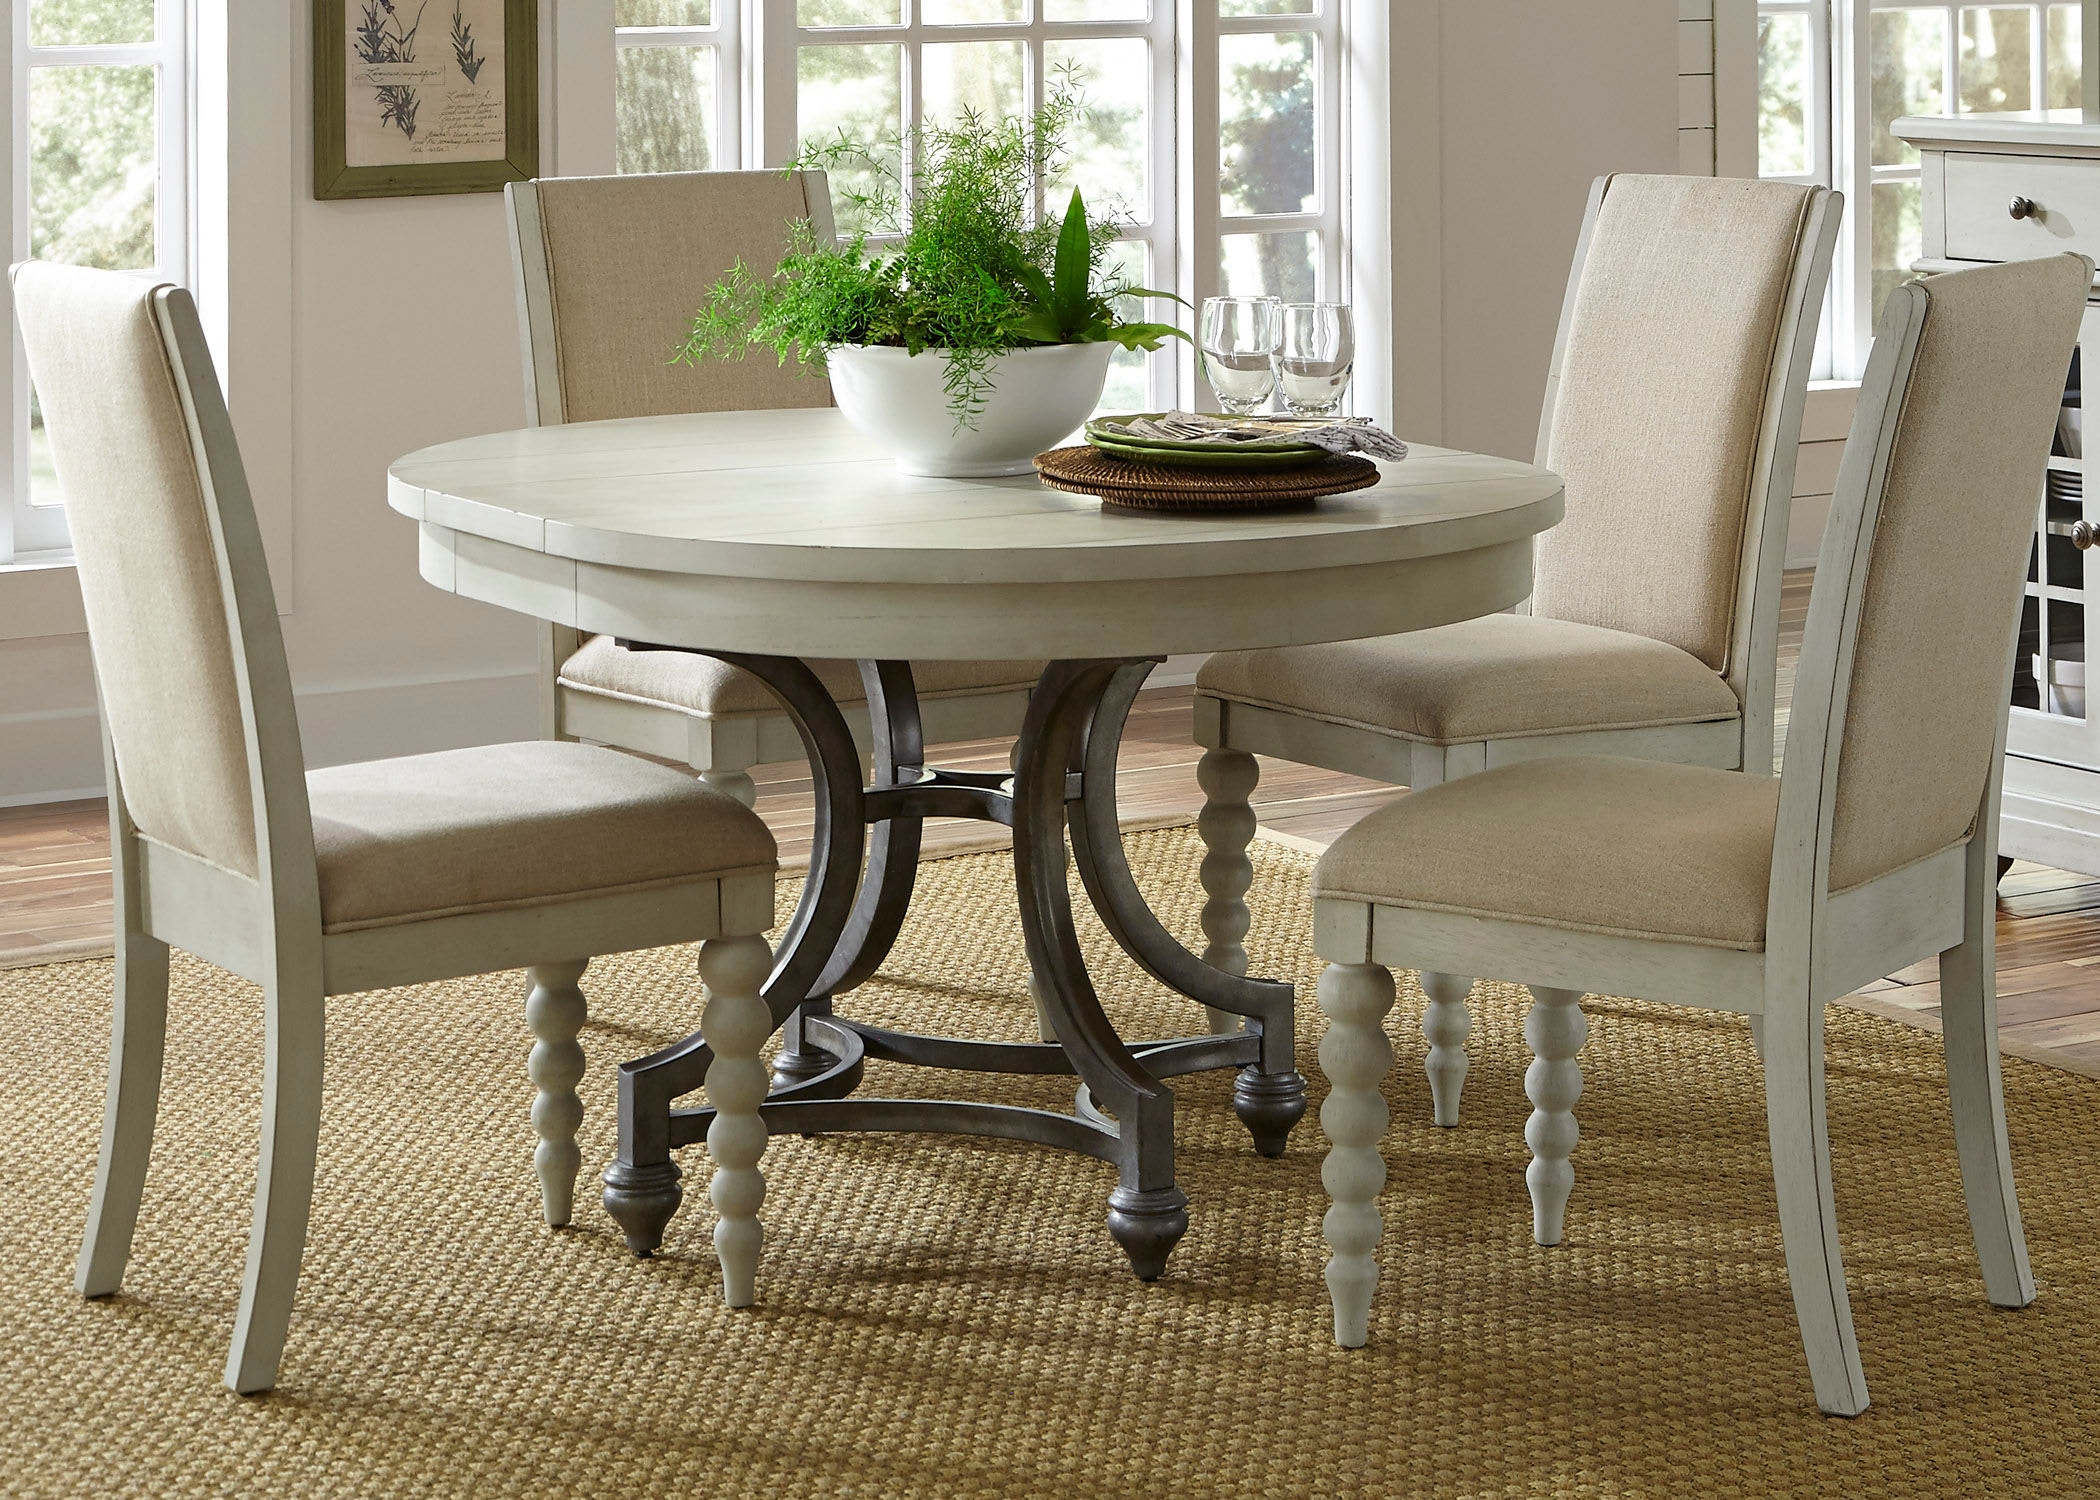 Liberty Dining Room Table And Chairs